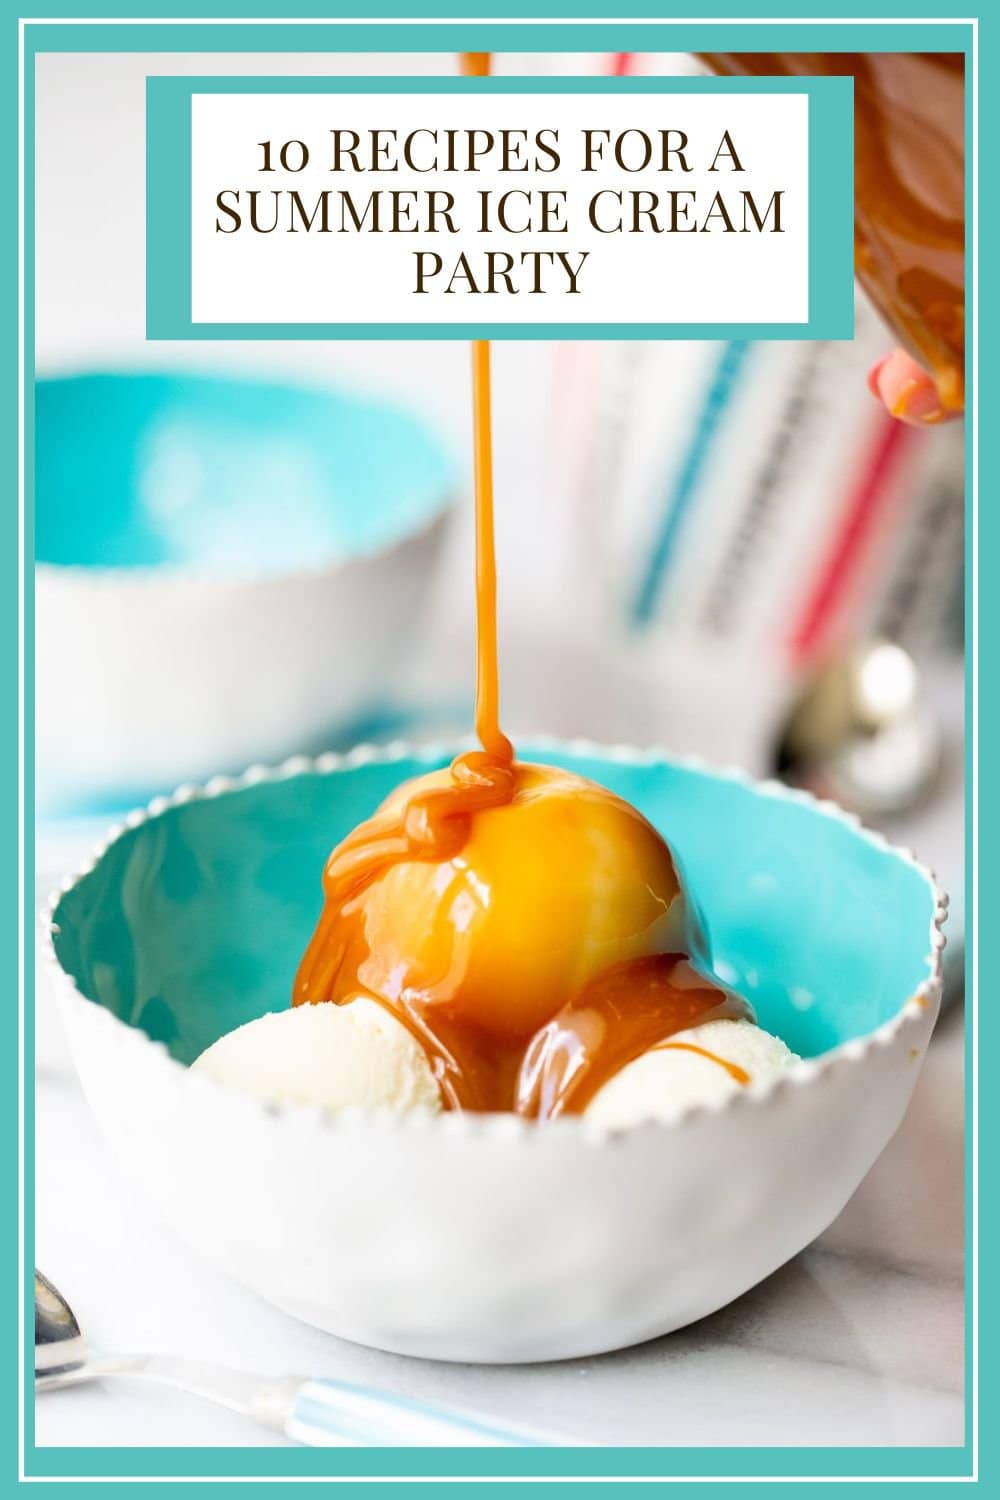 Delicious Recipes for a Summer Ice Cream Party!